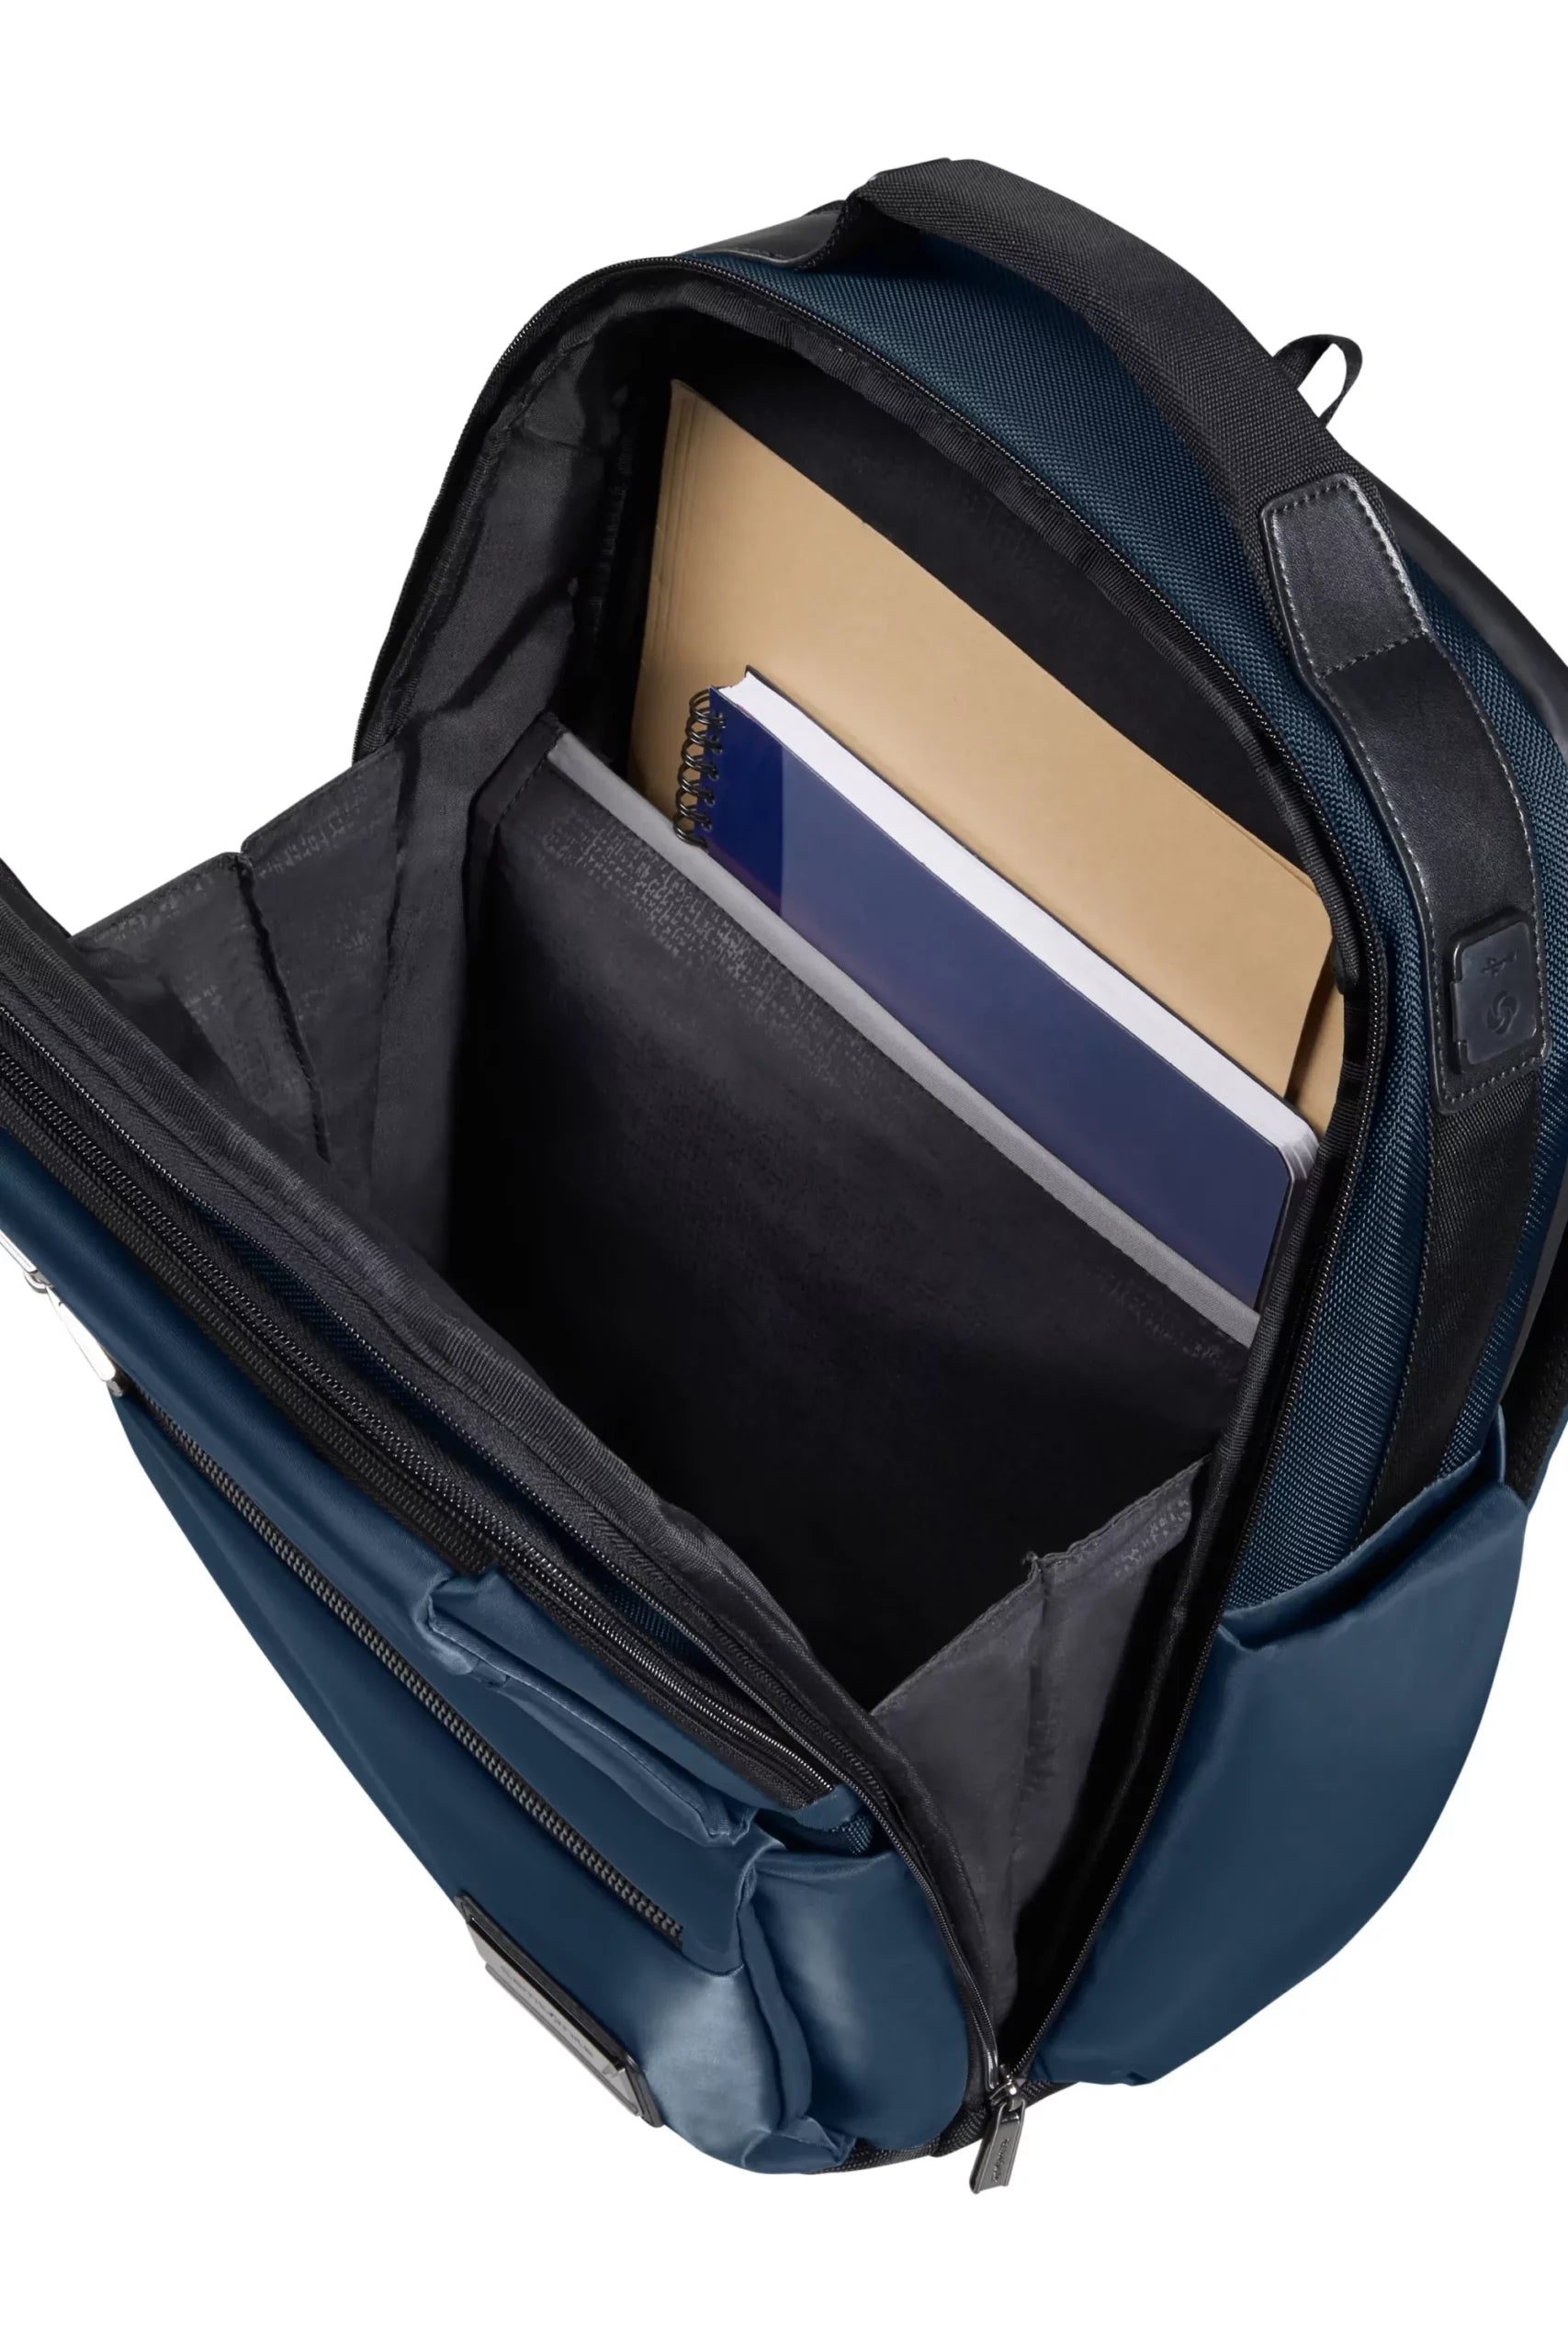 137207-1971-OPENROAD_2.0_LAPTOP_BACKPACK_INTERIOR_1-02cbee53-ba11-4b13-aa0e-ac8a00d4c461